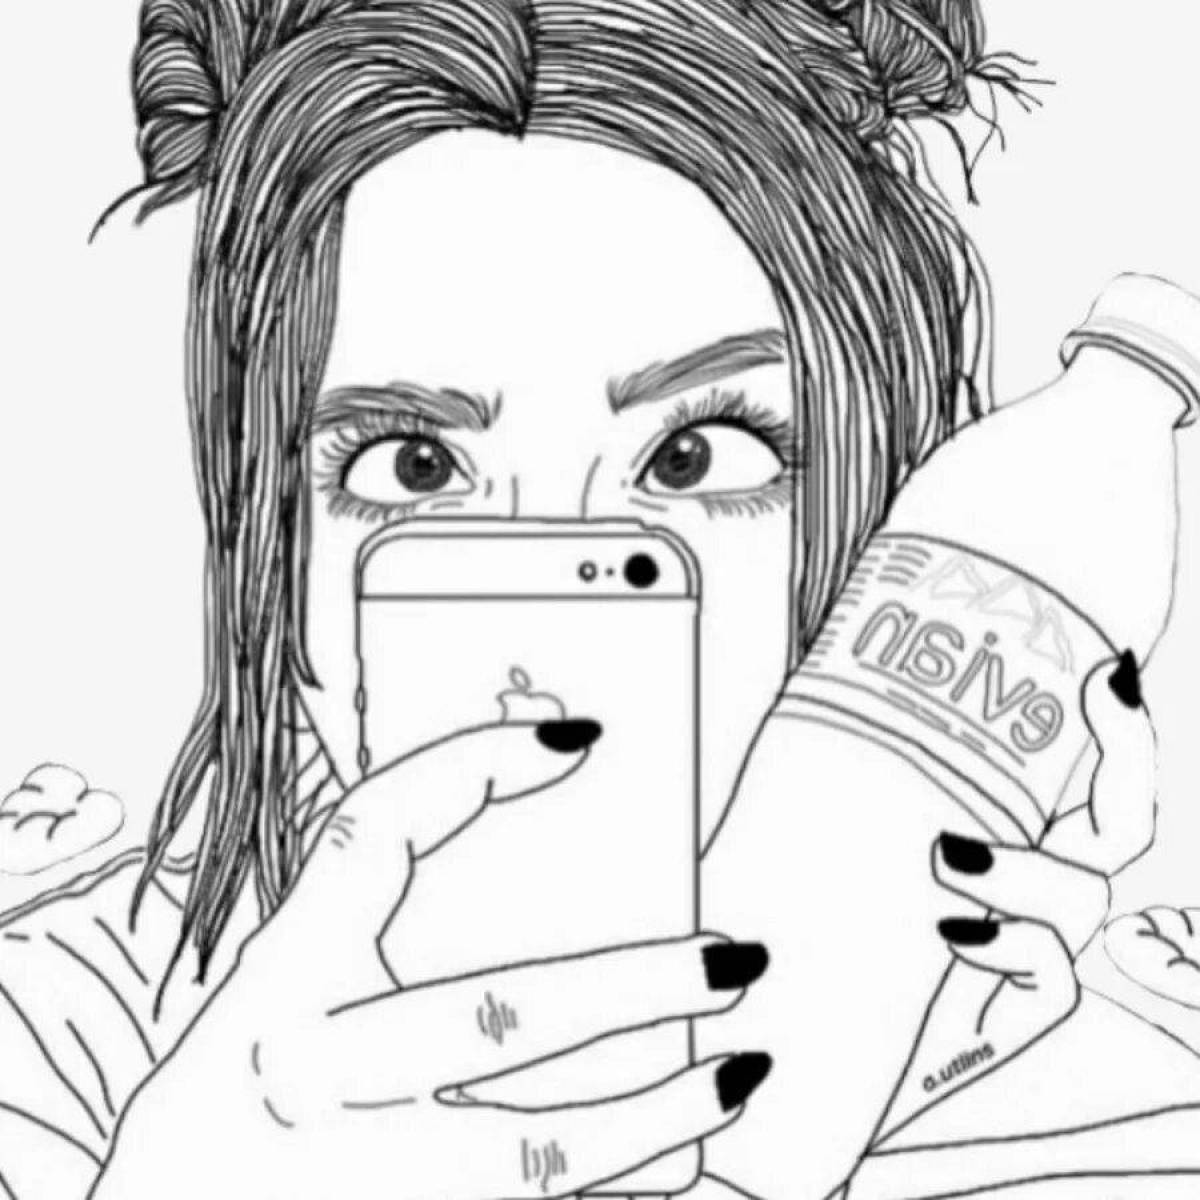 Coloring pages for girls with iPhones